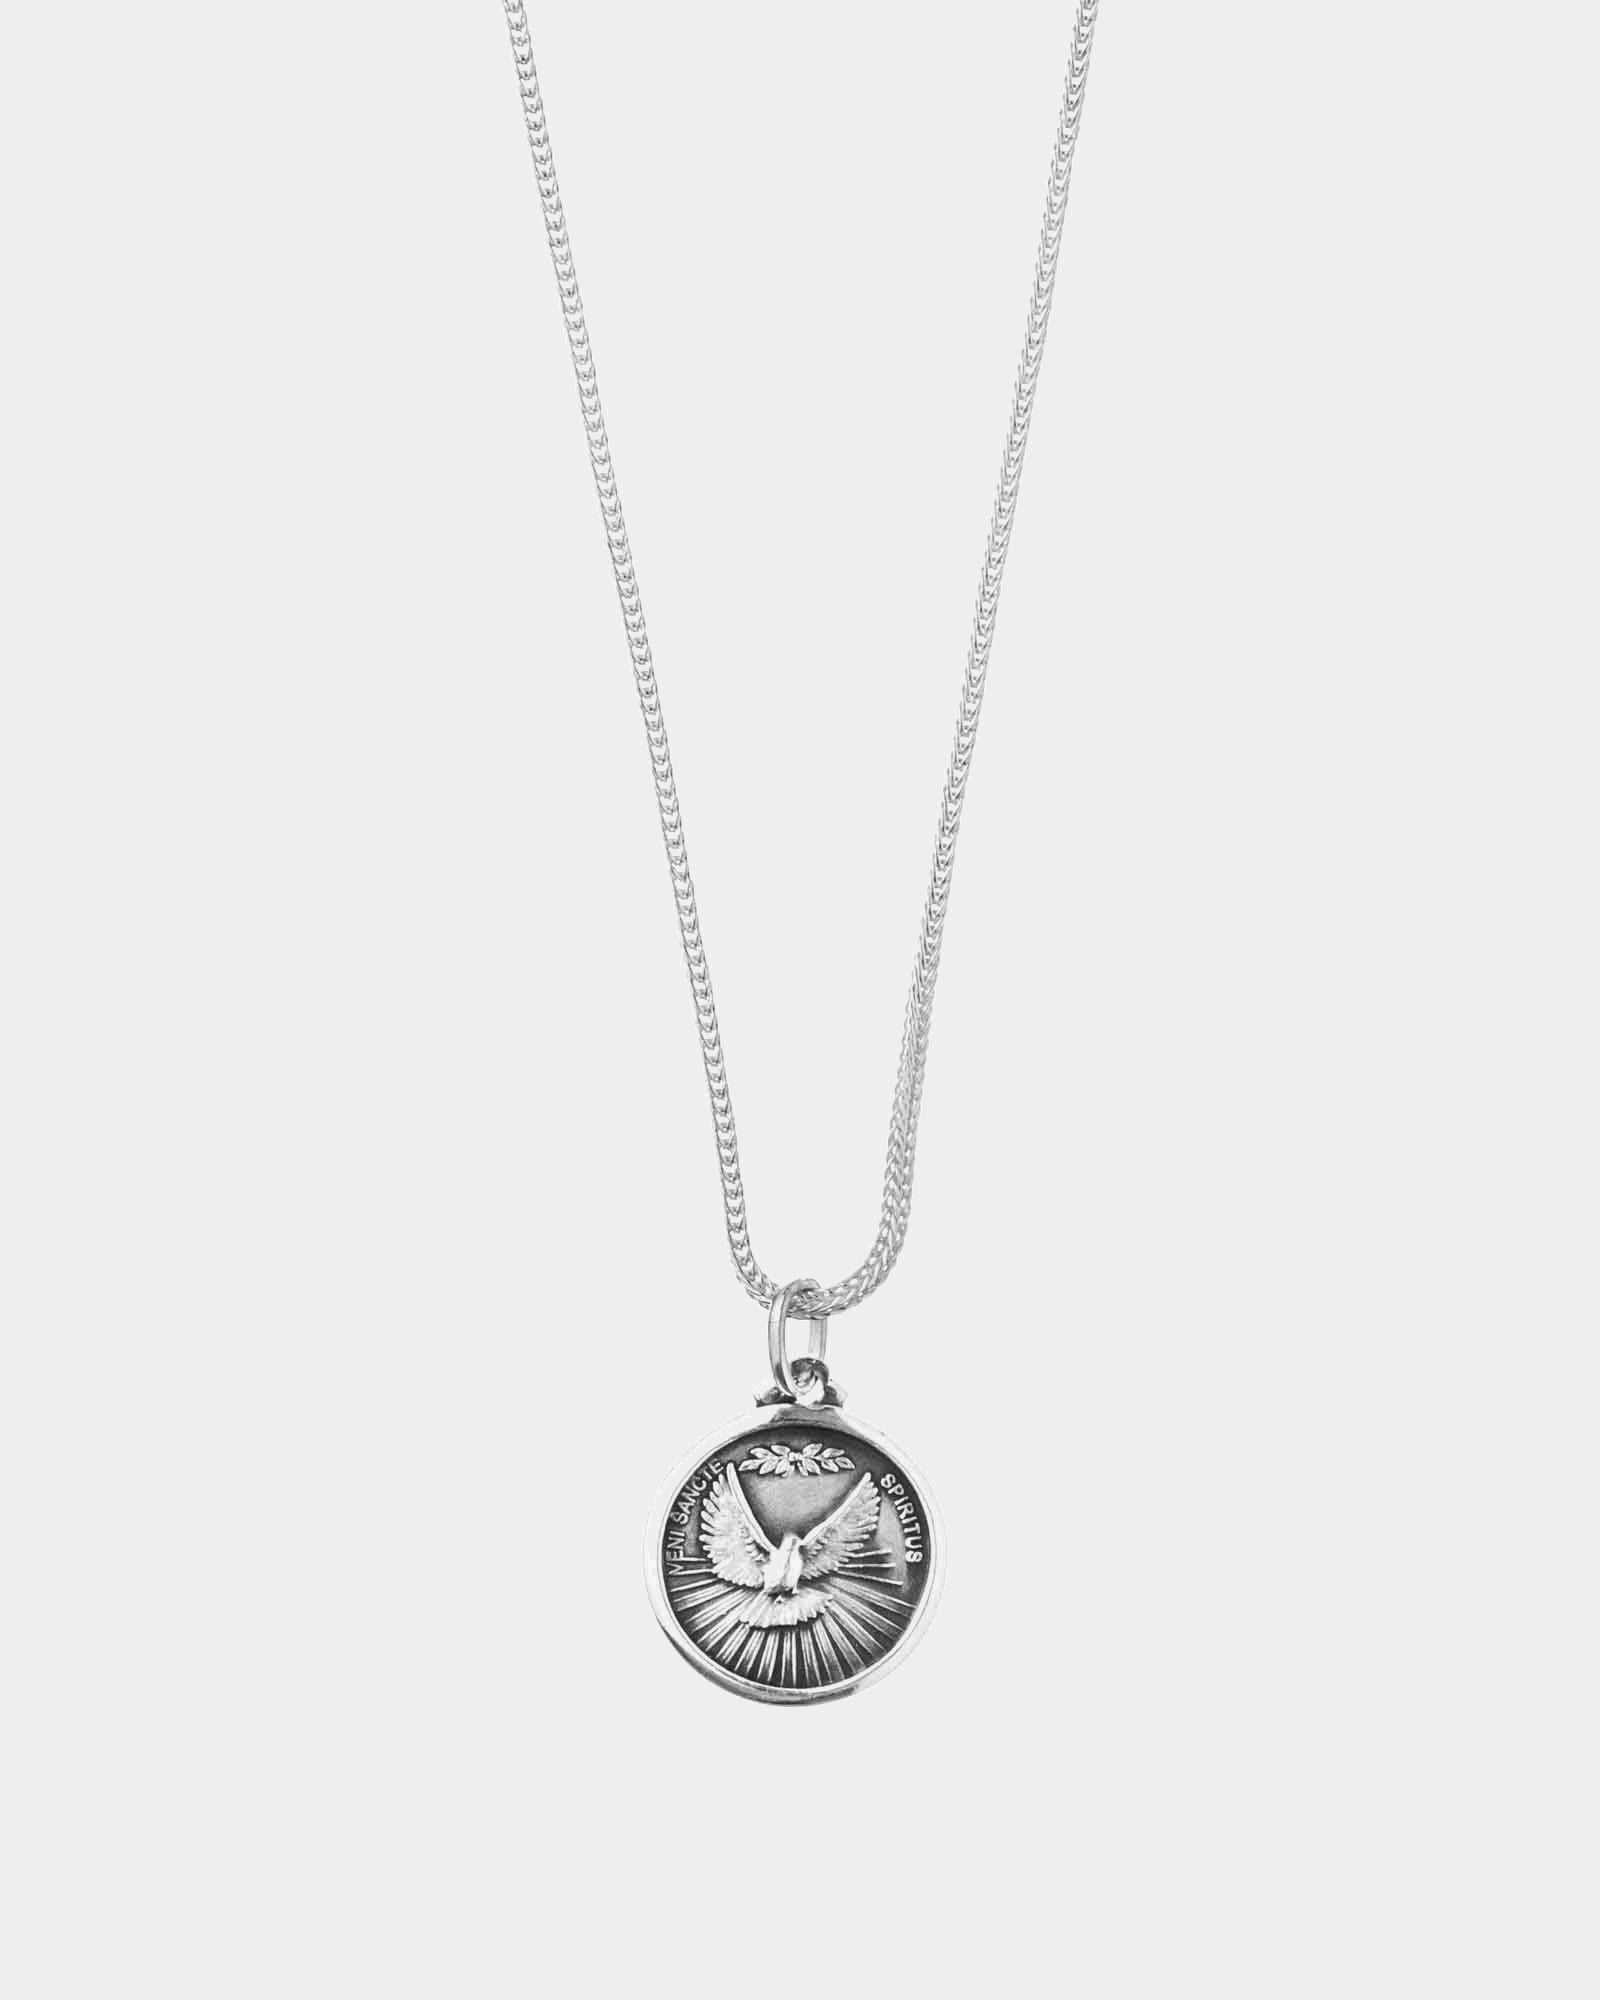 Holy Spirit - 925 Sterling Silver Necklace with 'Holy Spirit' pendant - Online Unissex Jewelry - Dicci